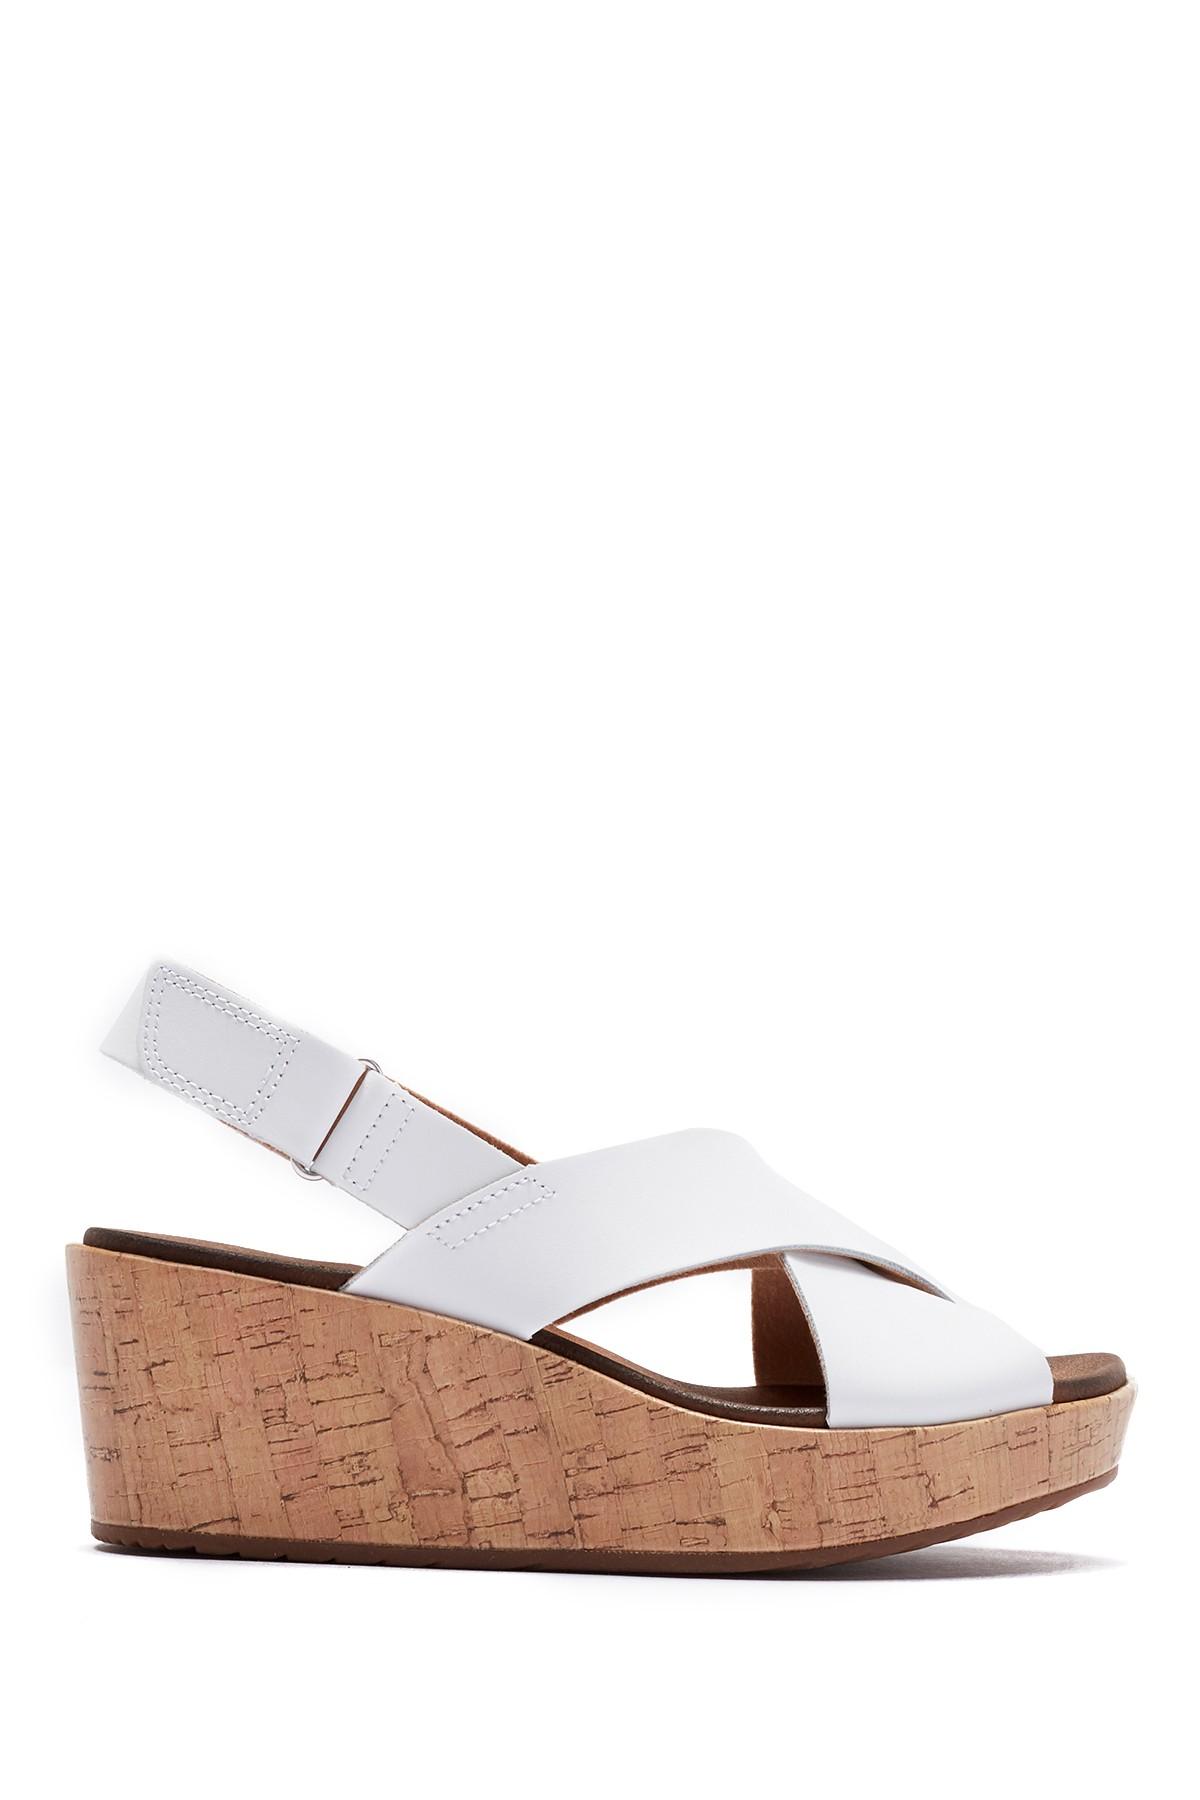 Clarks Stasha Hale Leather Wedge Sandal - Wide Width Available in White ...